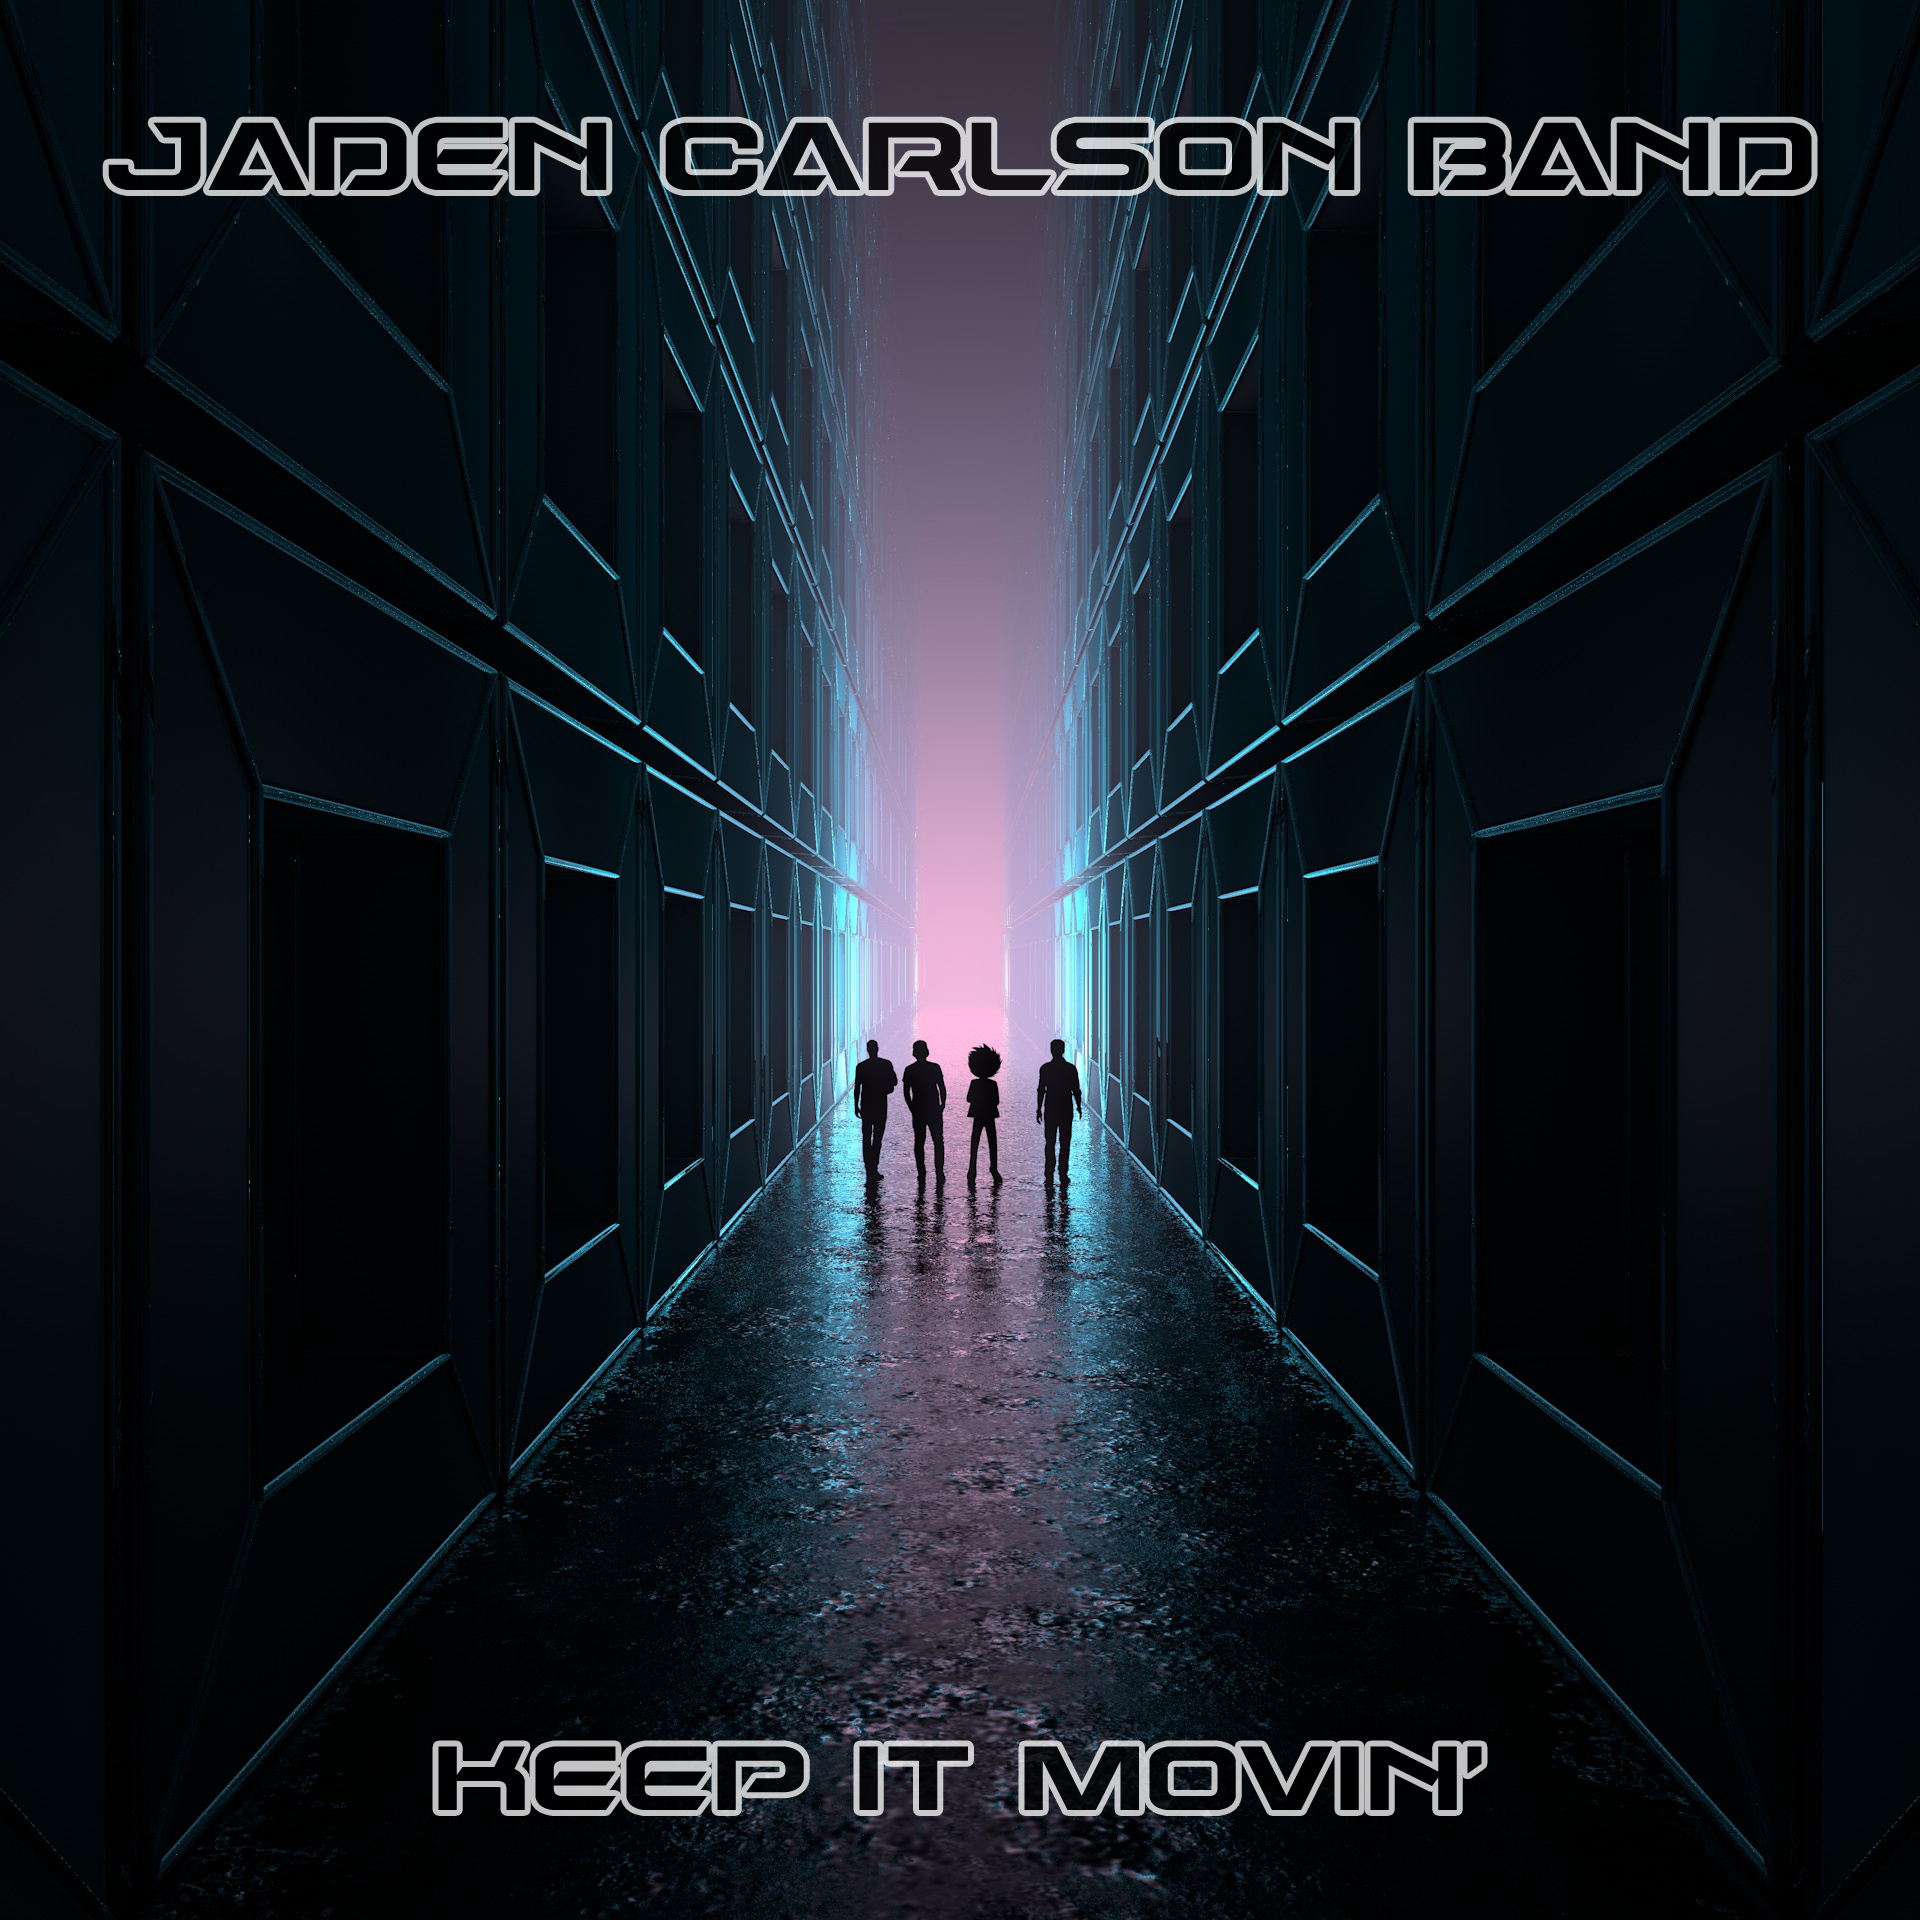 New Album from Jaden Carlson Band - Keep It Movin' out 5/4